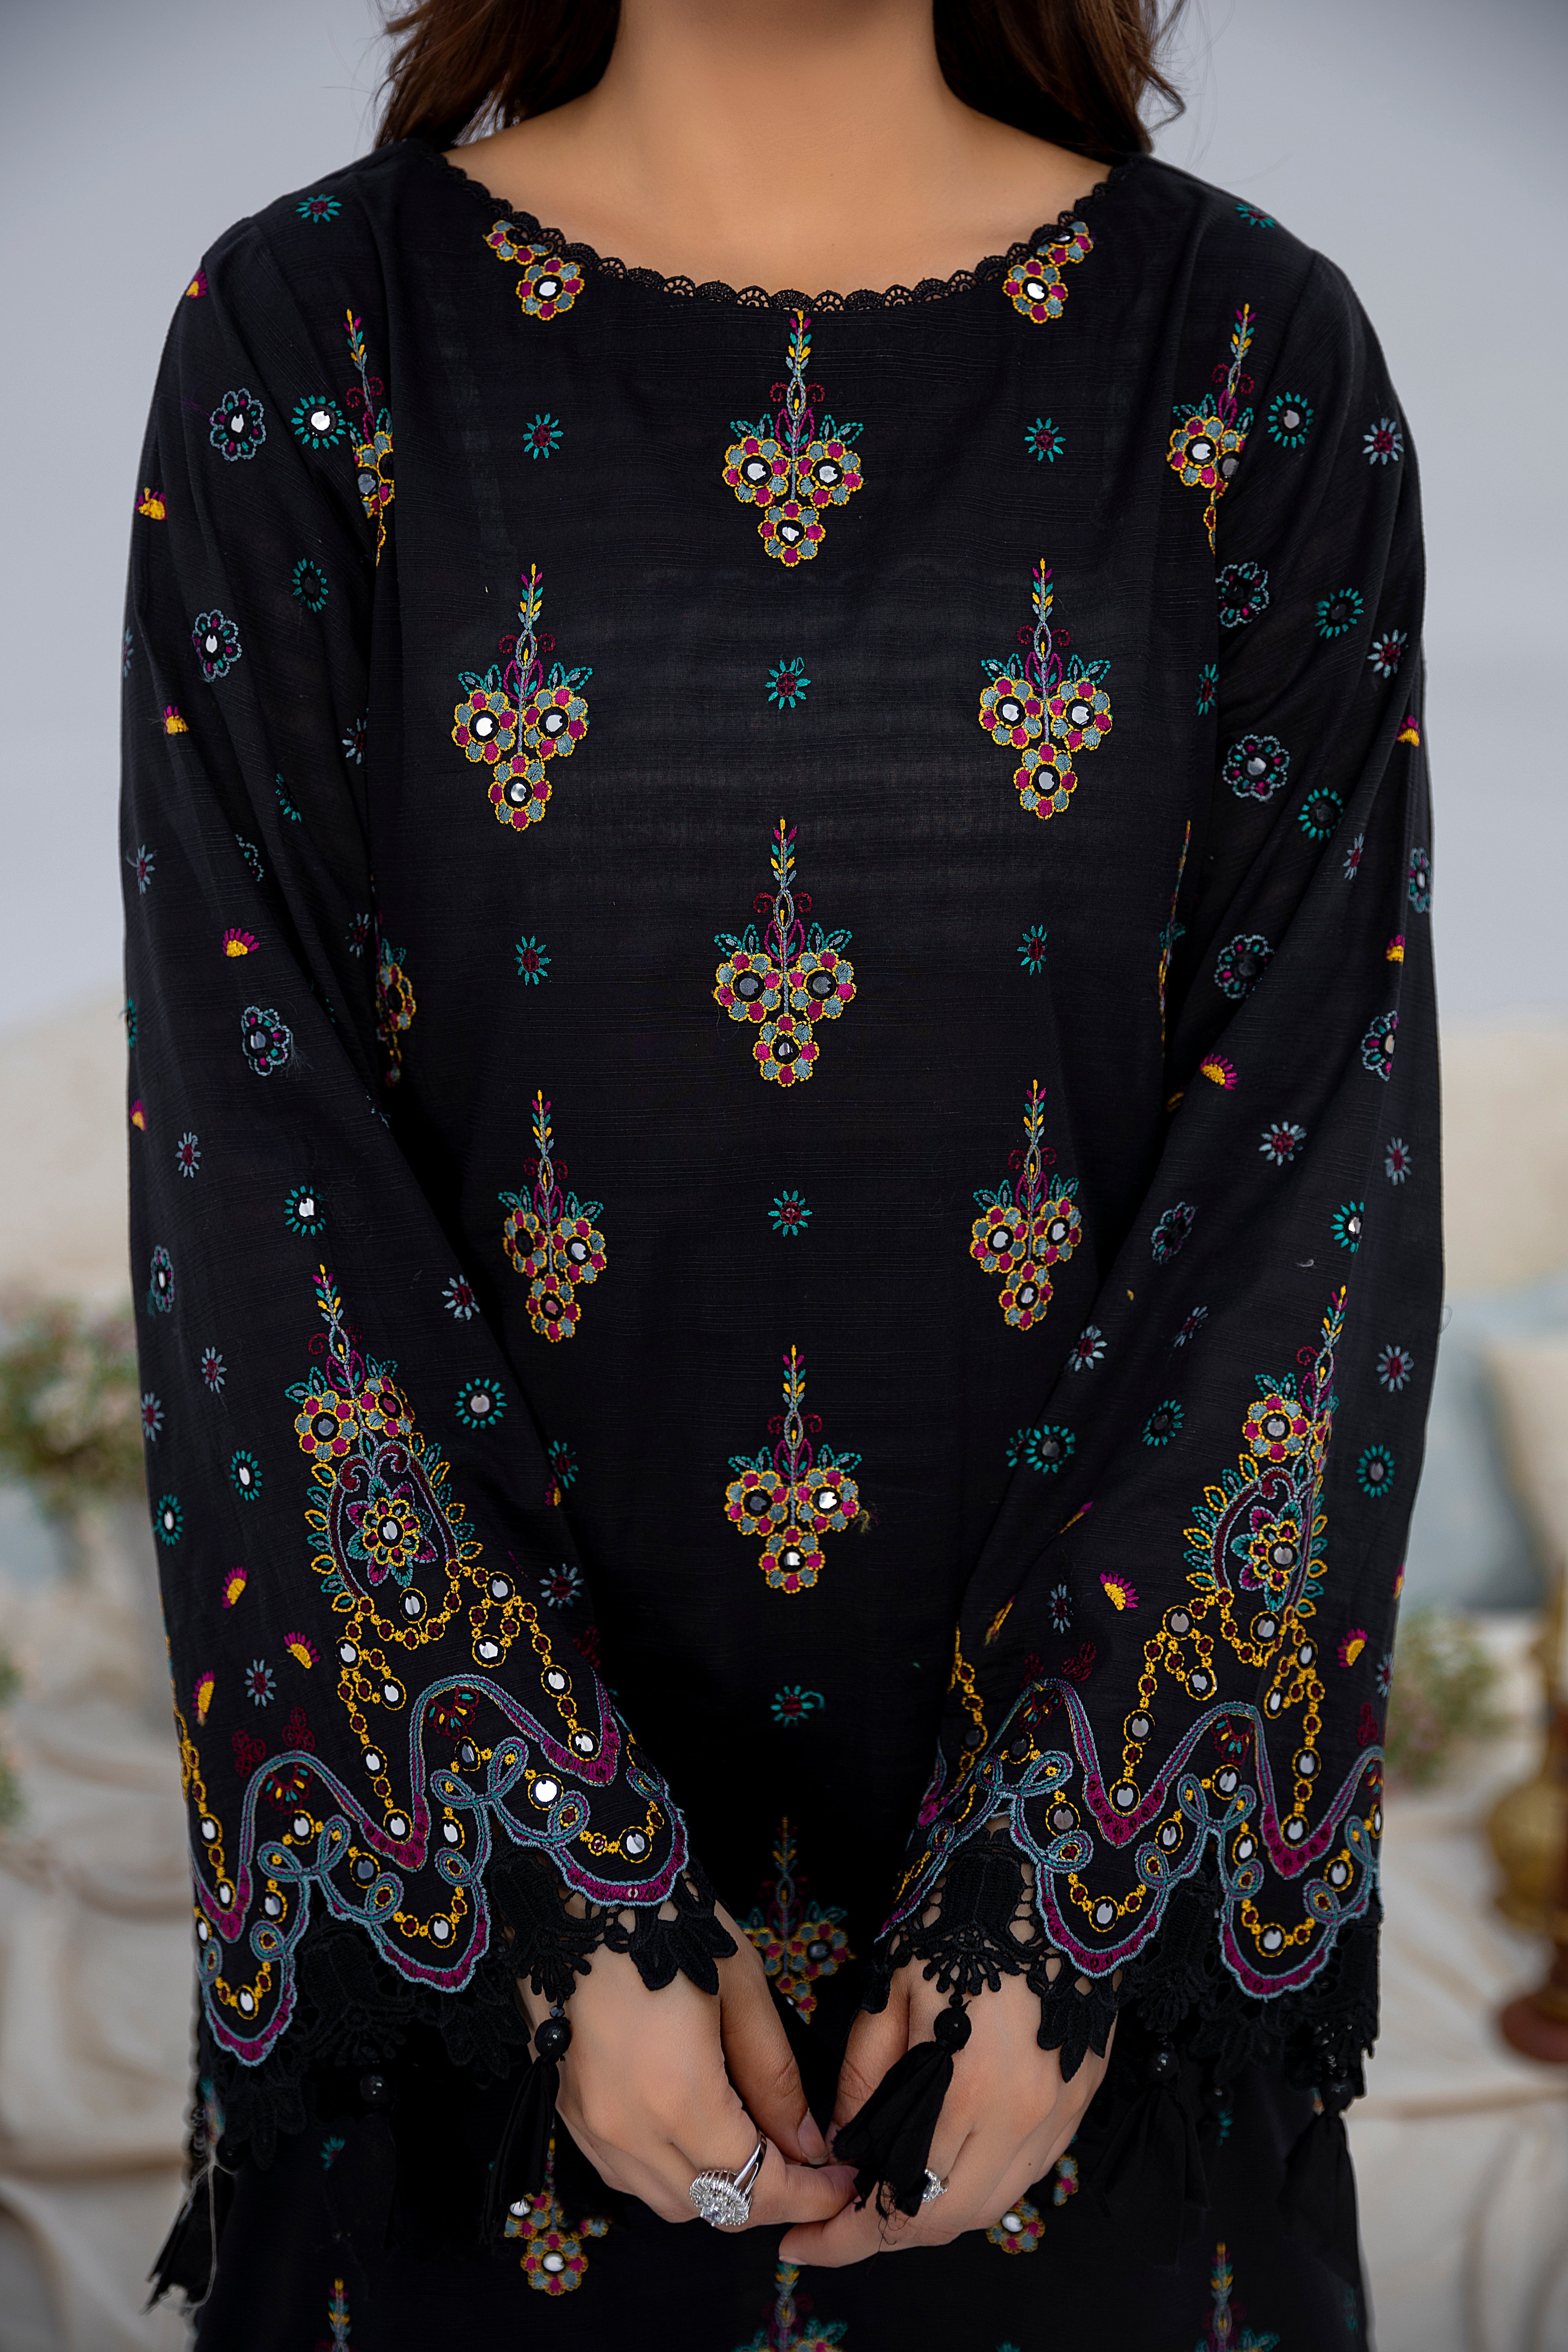 Luxury Sindhi Embroidered Lawn-3PC